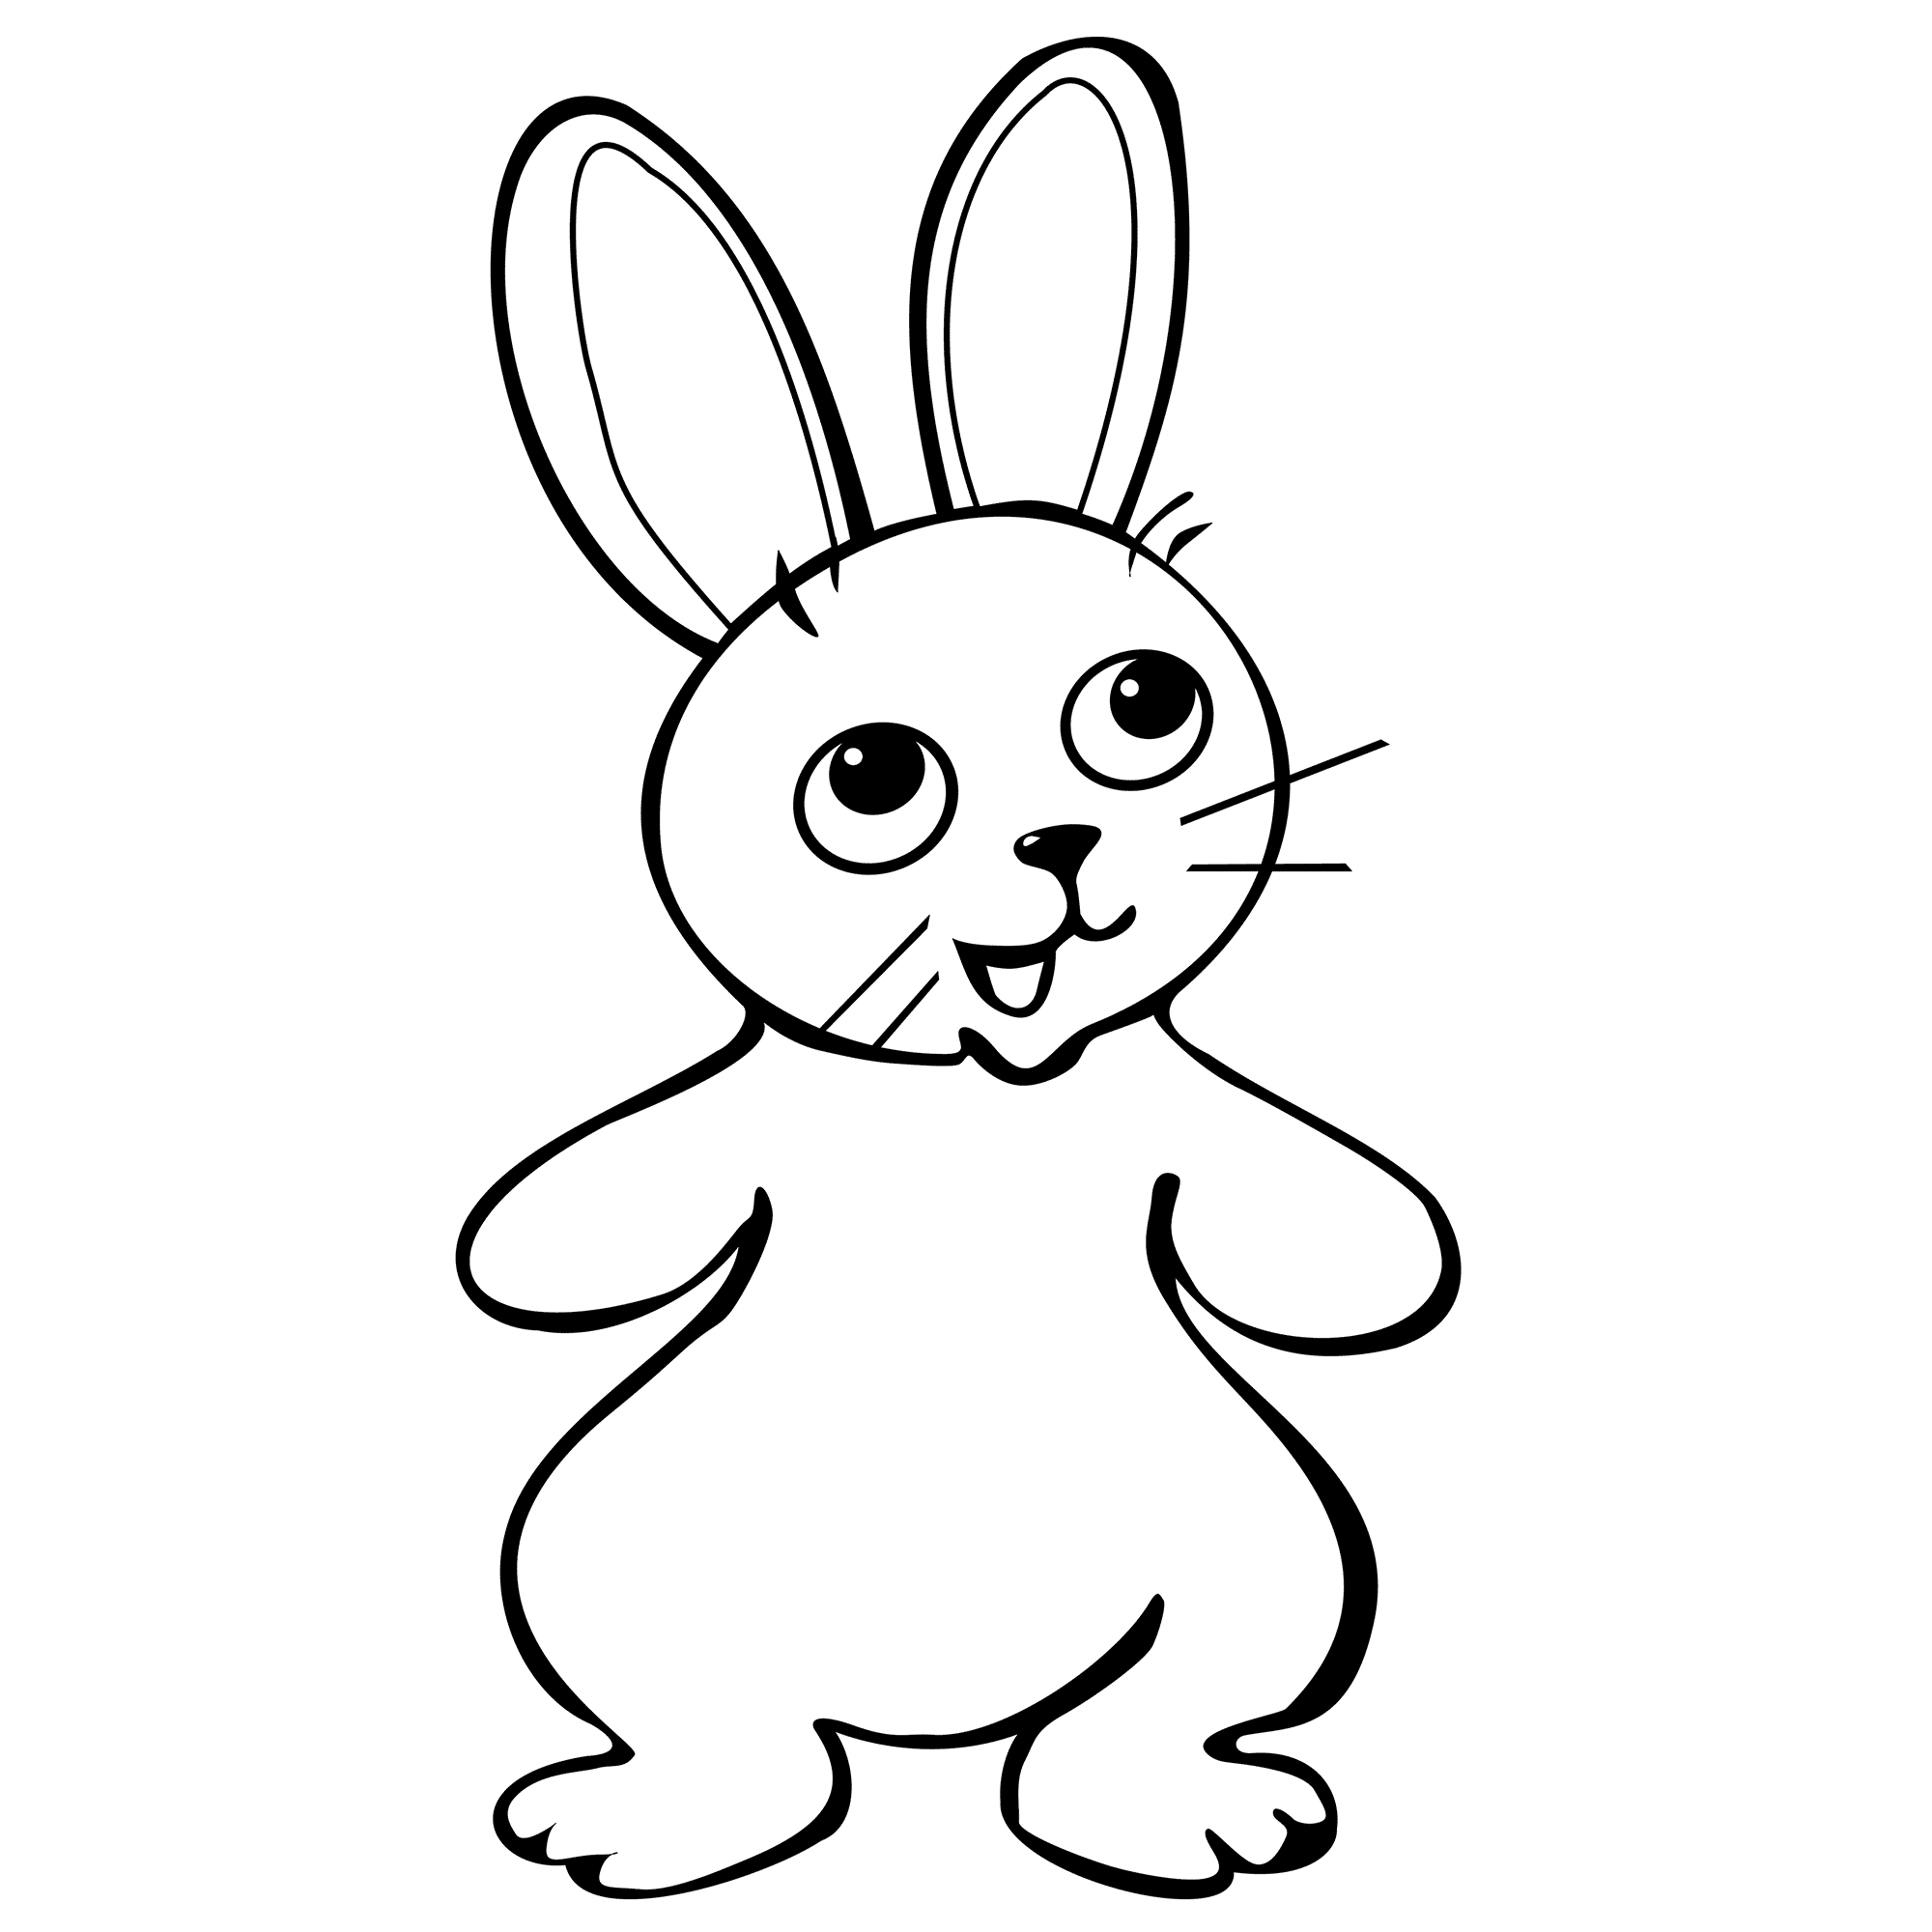 rabbit picture for colouring top 15 free printable bunny coloring pages online picture for colouring rabbit 